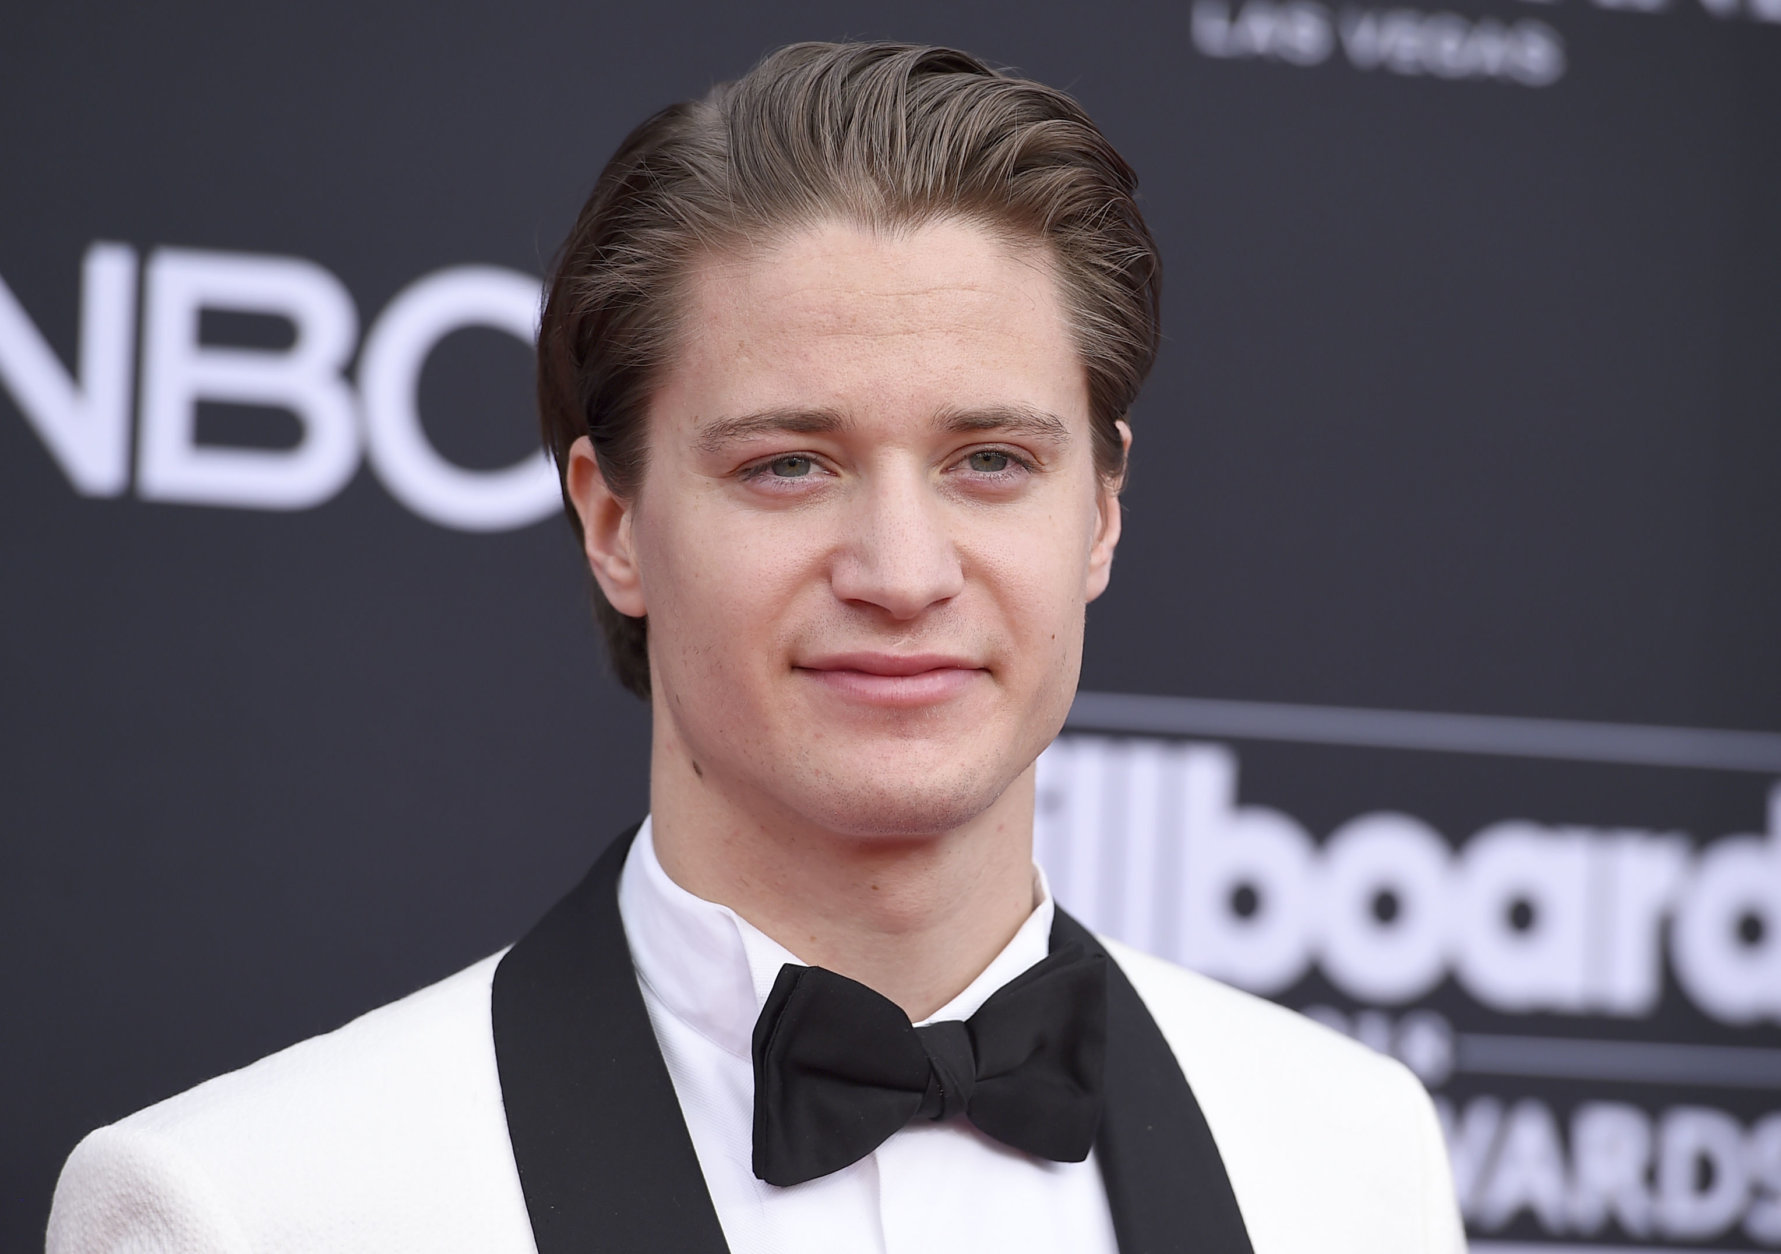 Kygo arrives at the Billboard Music Awards at the MGM Grand Garden Arena on Sunday, May 20, 2018, in Las Vegas. (Photo by Jordan Strauss/Invision/AP)